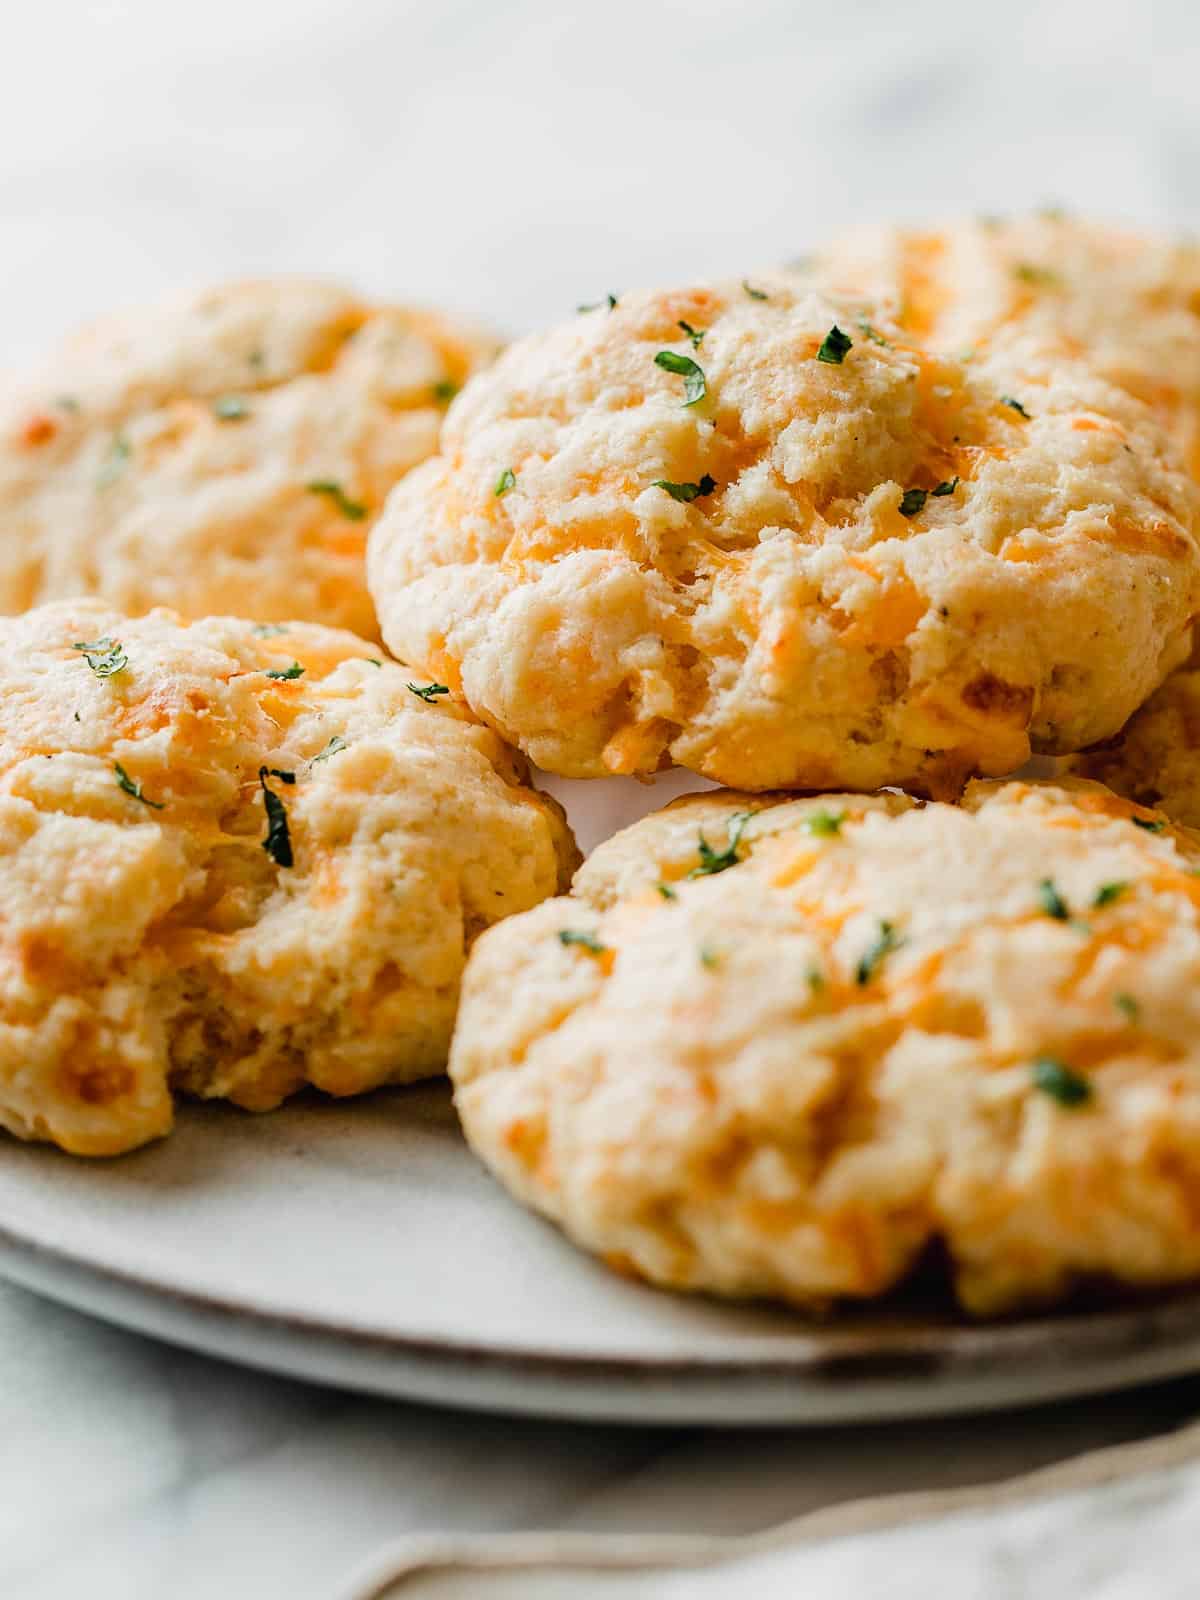 Cheddar bay biscuits stacked on a plate.